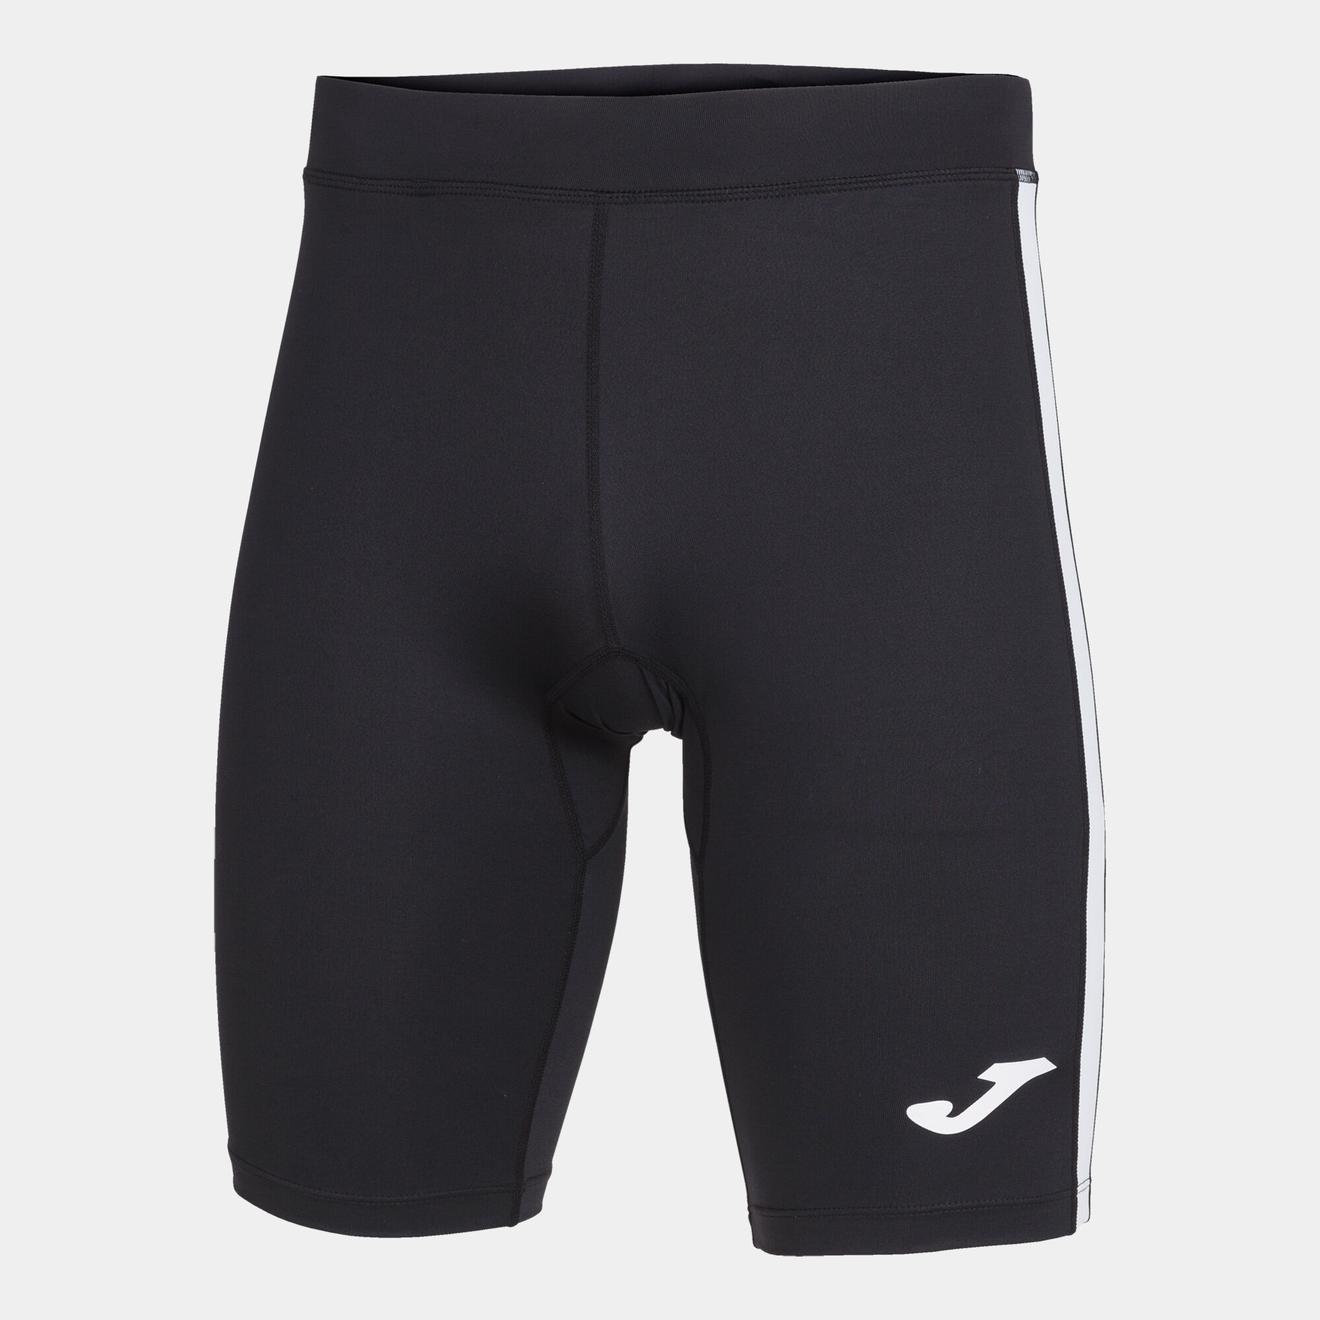 Short tights man Elite VII black white offers at £12.5 in Joma